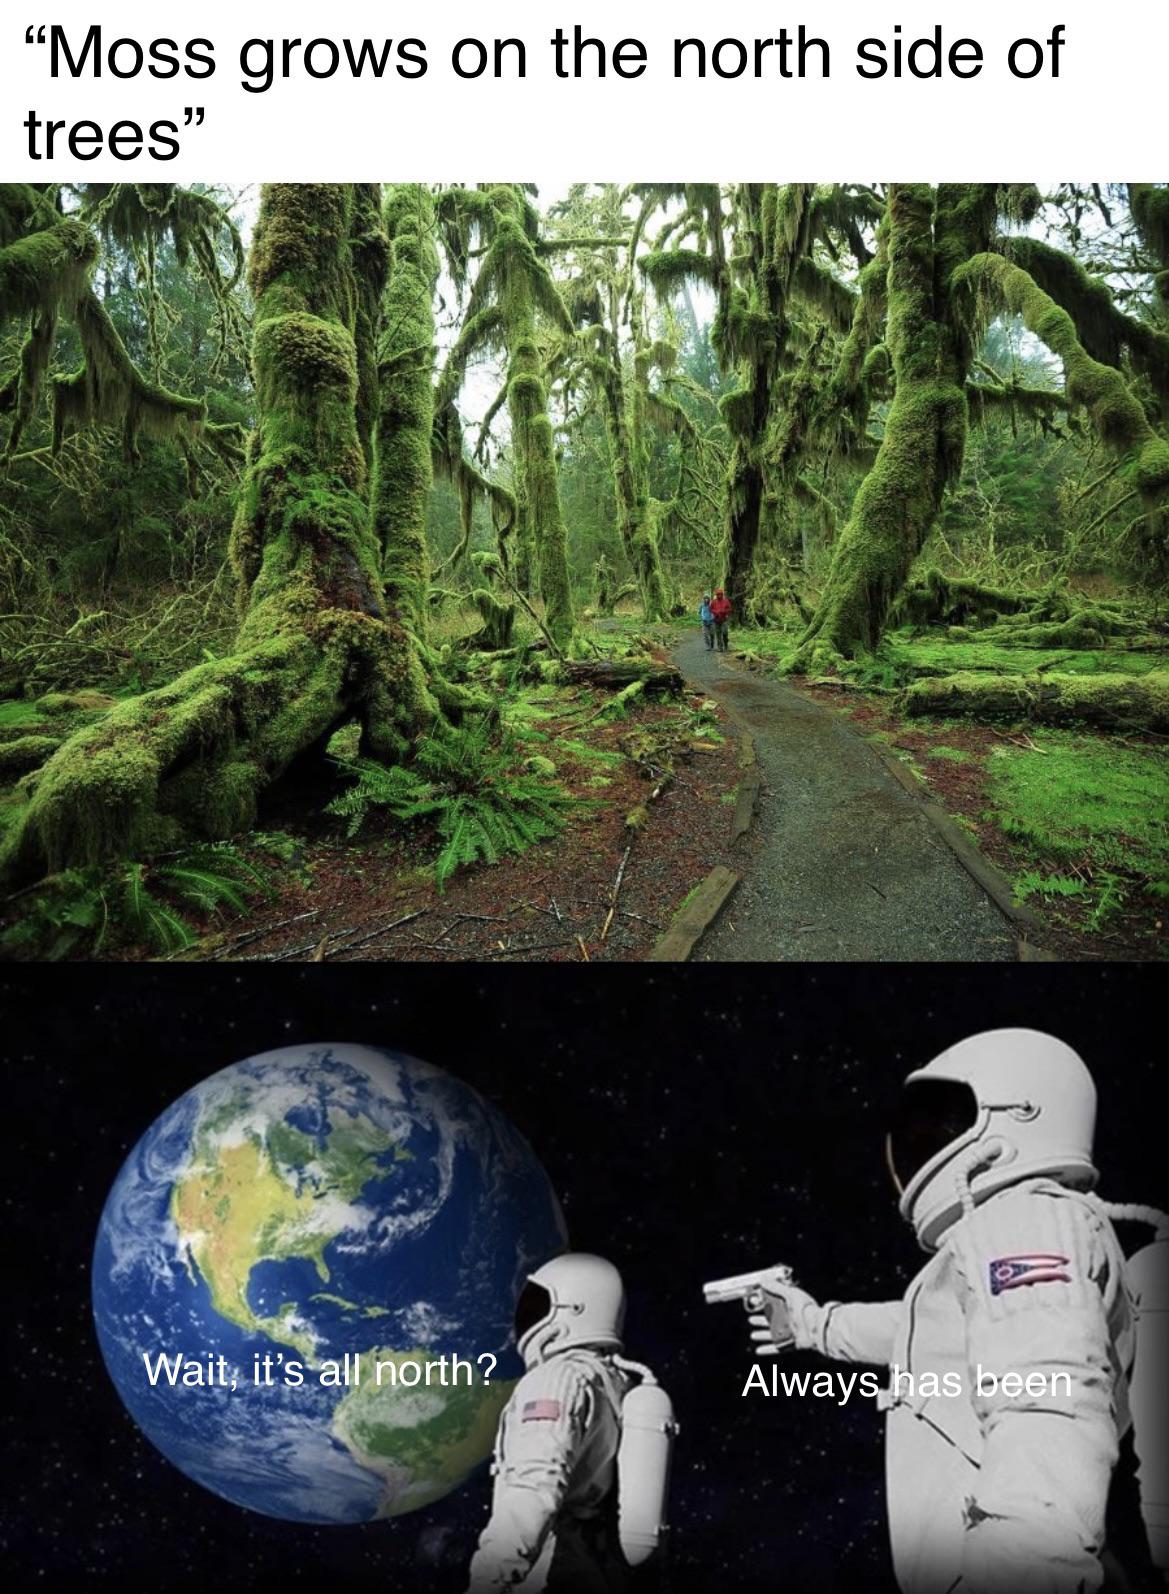 funny pics and memes - always has been meme 3 astronauts - "Moss grows on the north side of trees" Wait, it's all north? Always has been